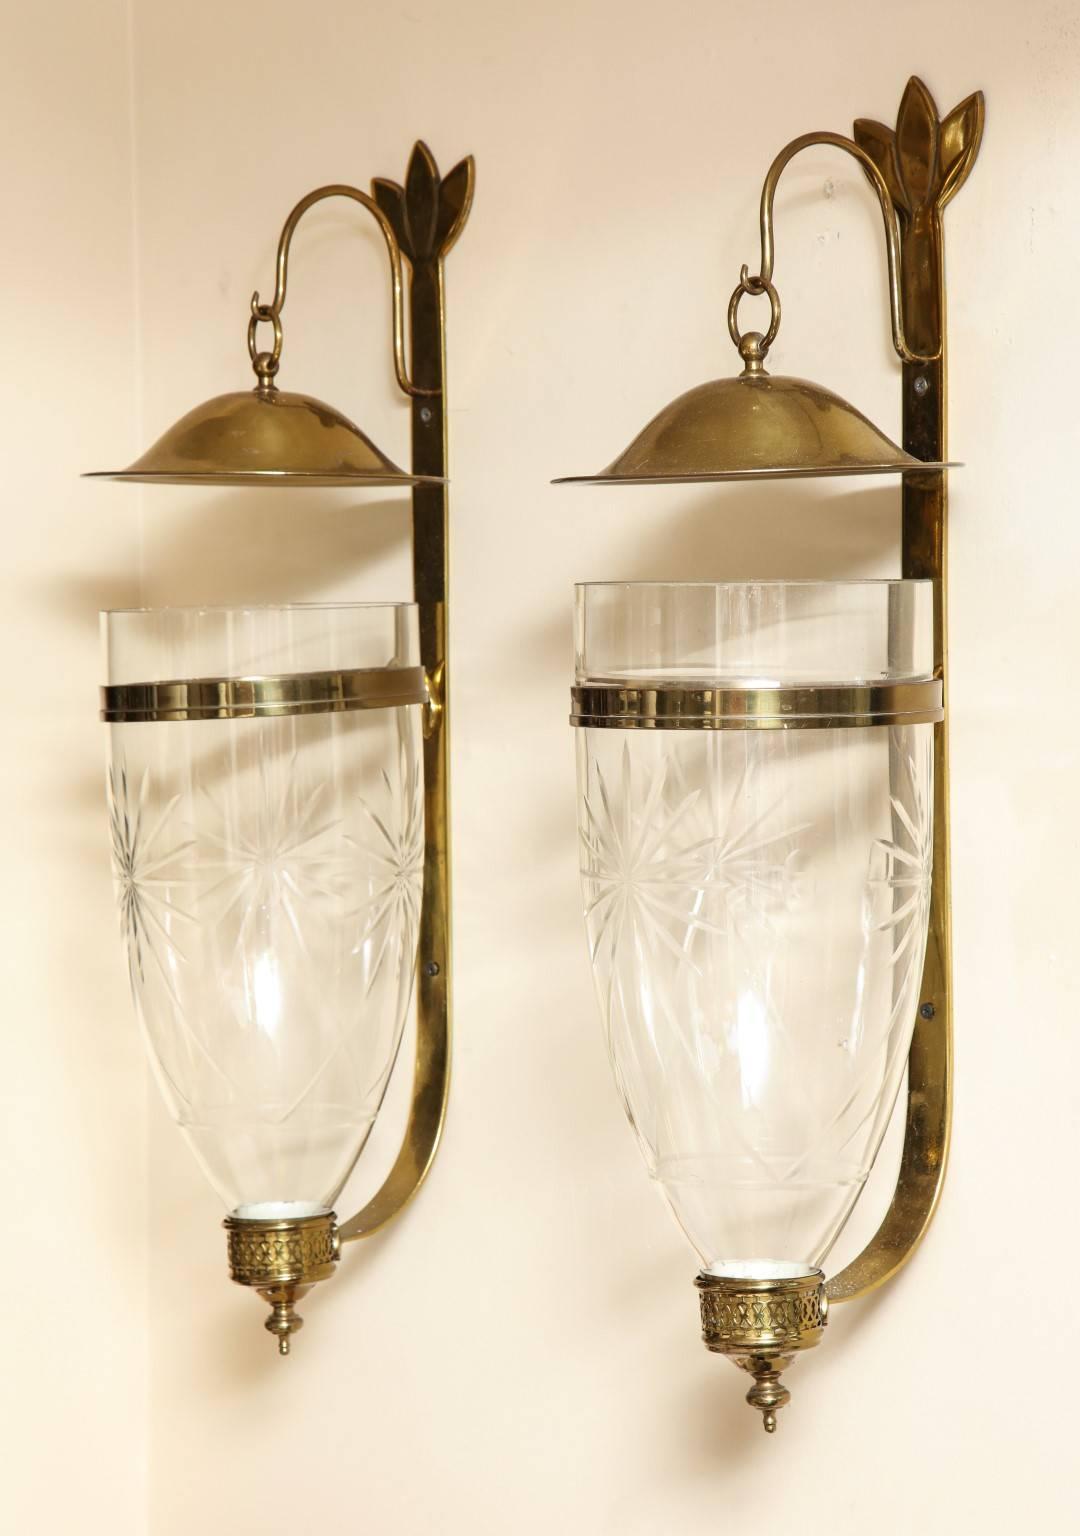 A pair of Georgian style wall lanterns with hand cut-glass hurricane globes having starbust motif, price includes non UL wiring with a single Edison socket.